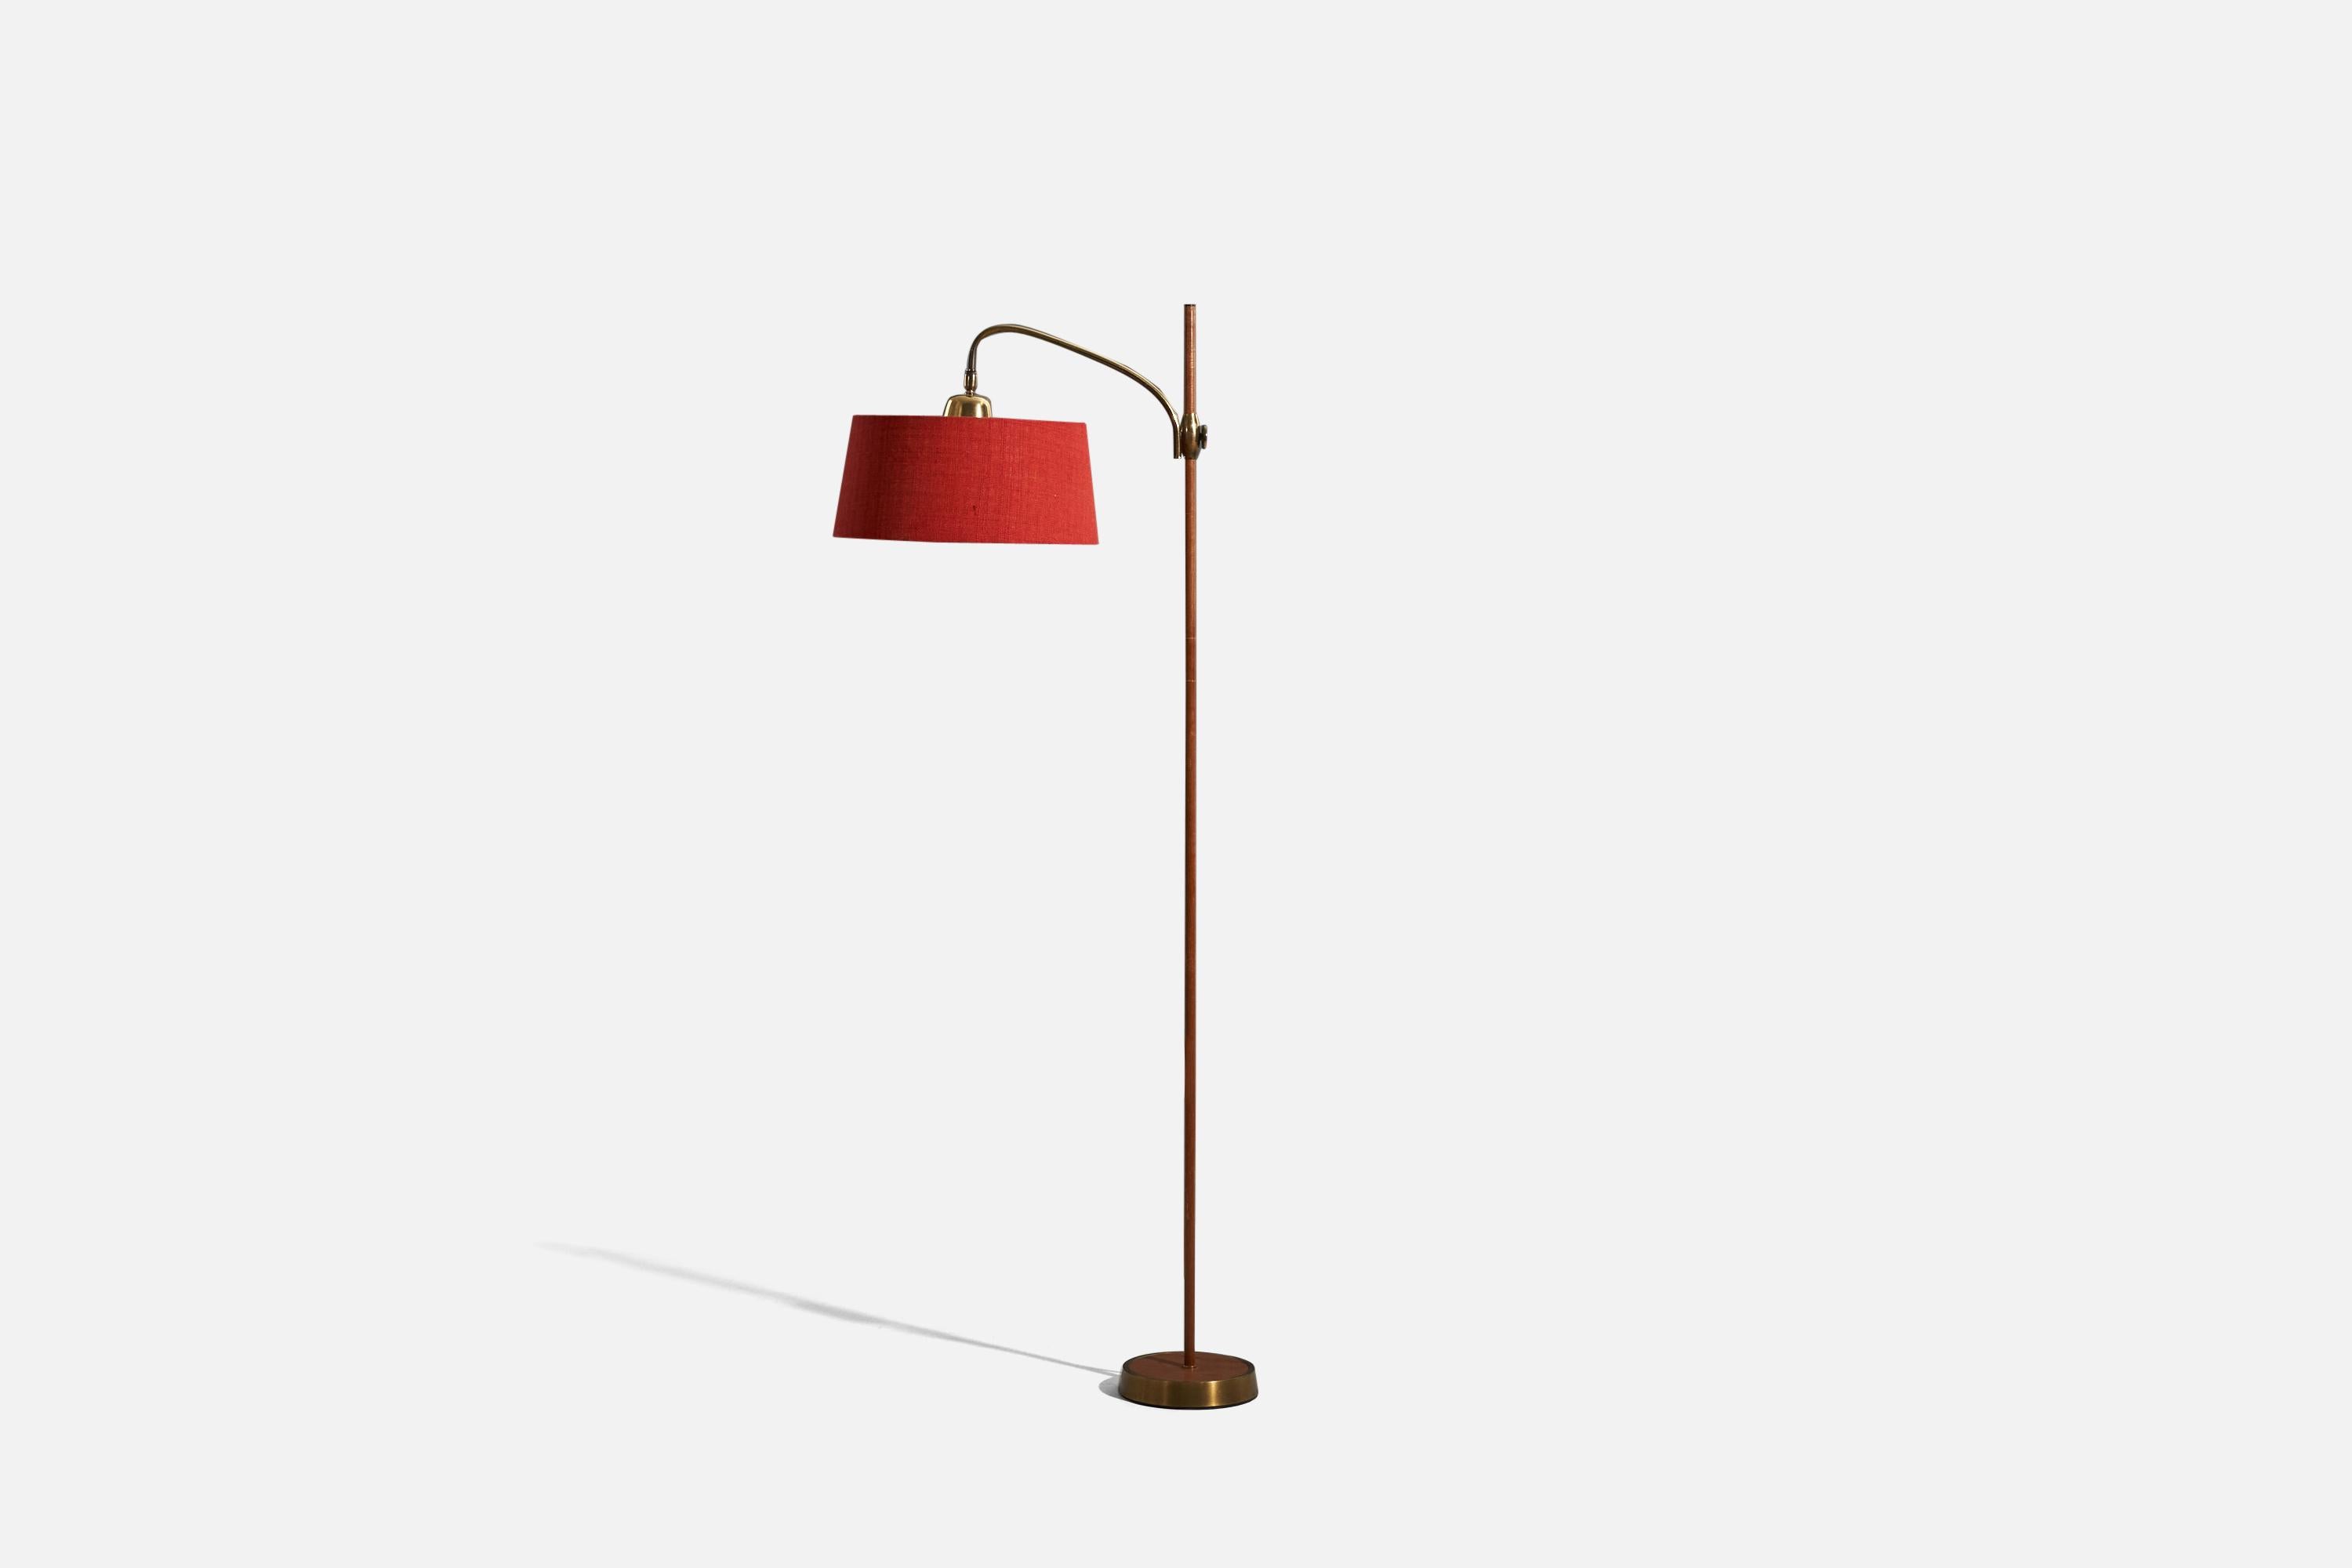 A teak, brass and red fabric floor lamp designed and produced in Austria, c. 1950s.

Variable dimensions, measured as illustrated in the first image.